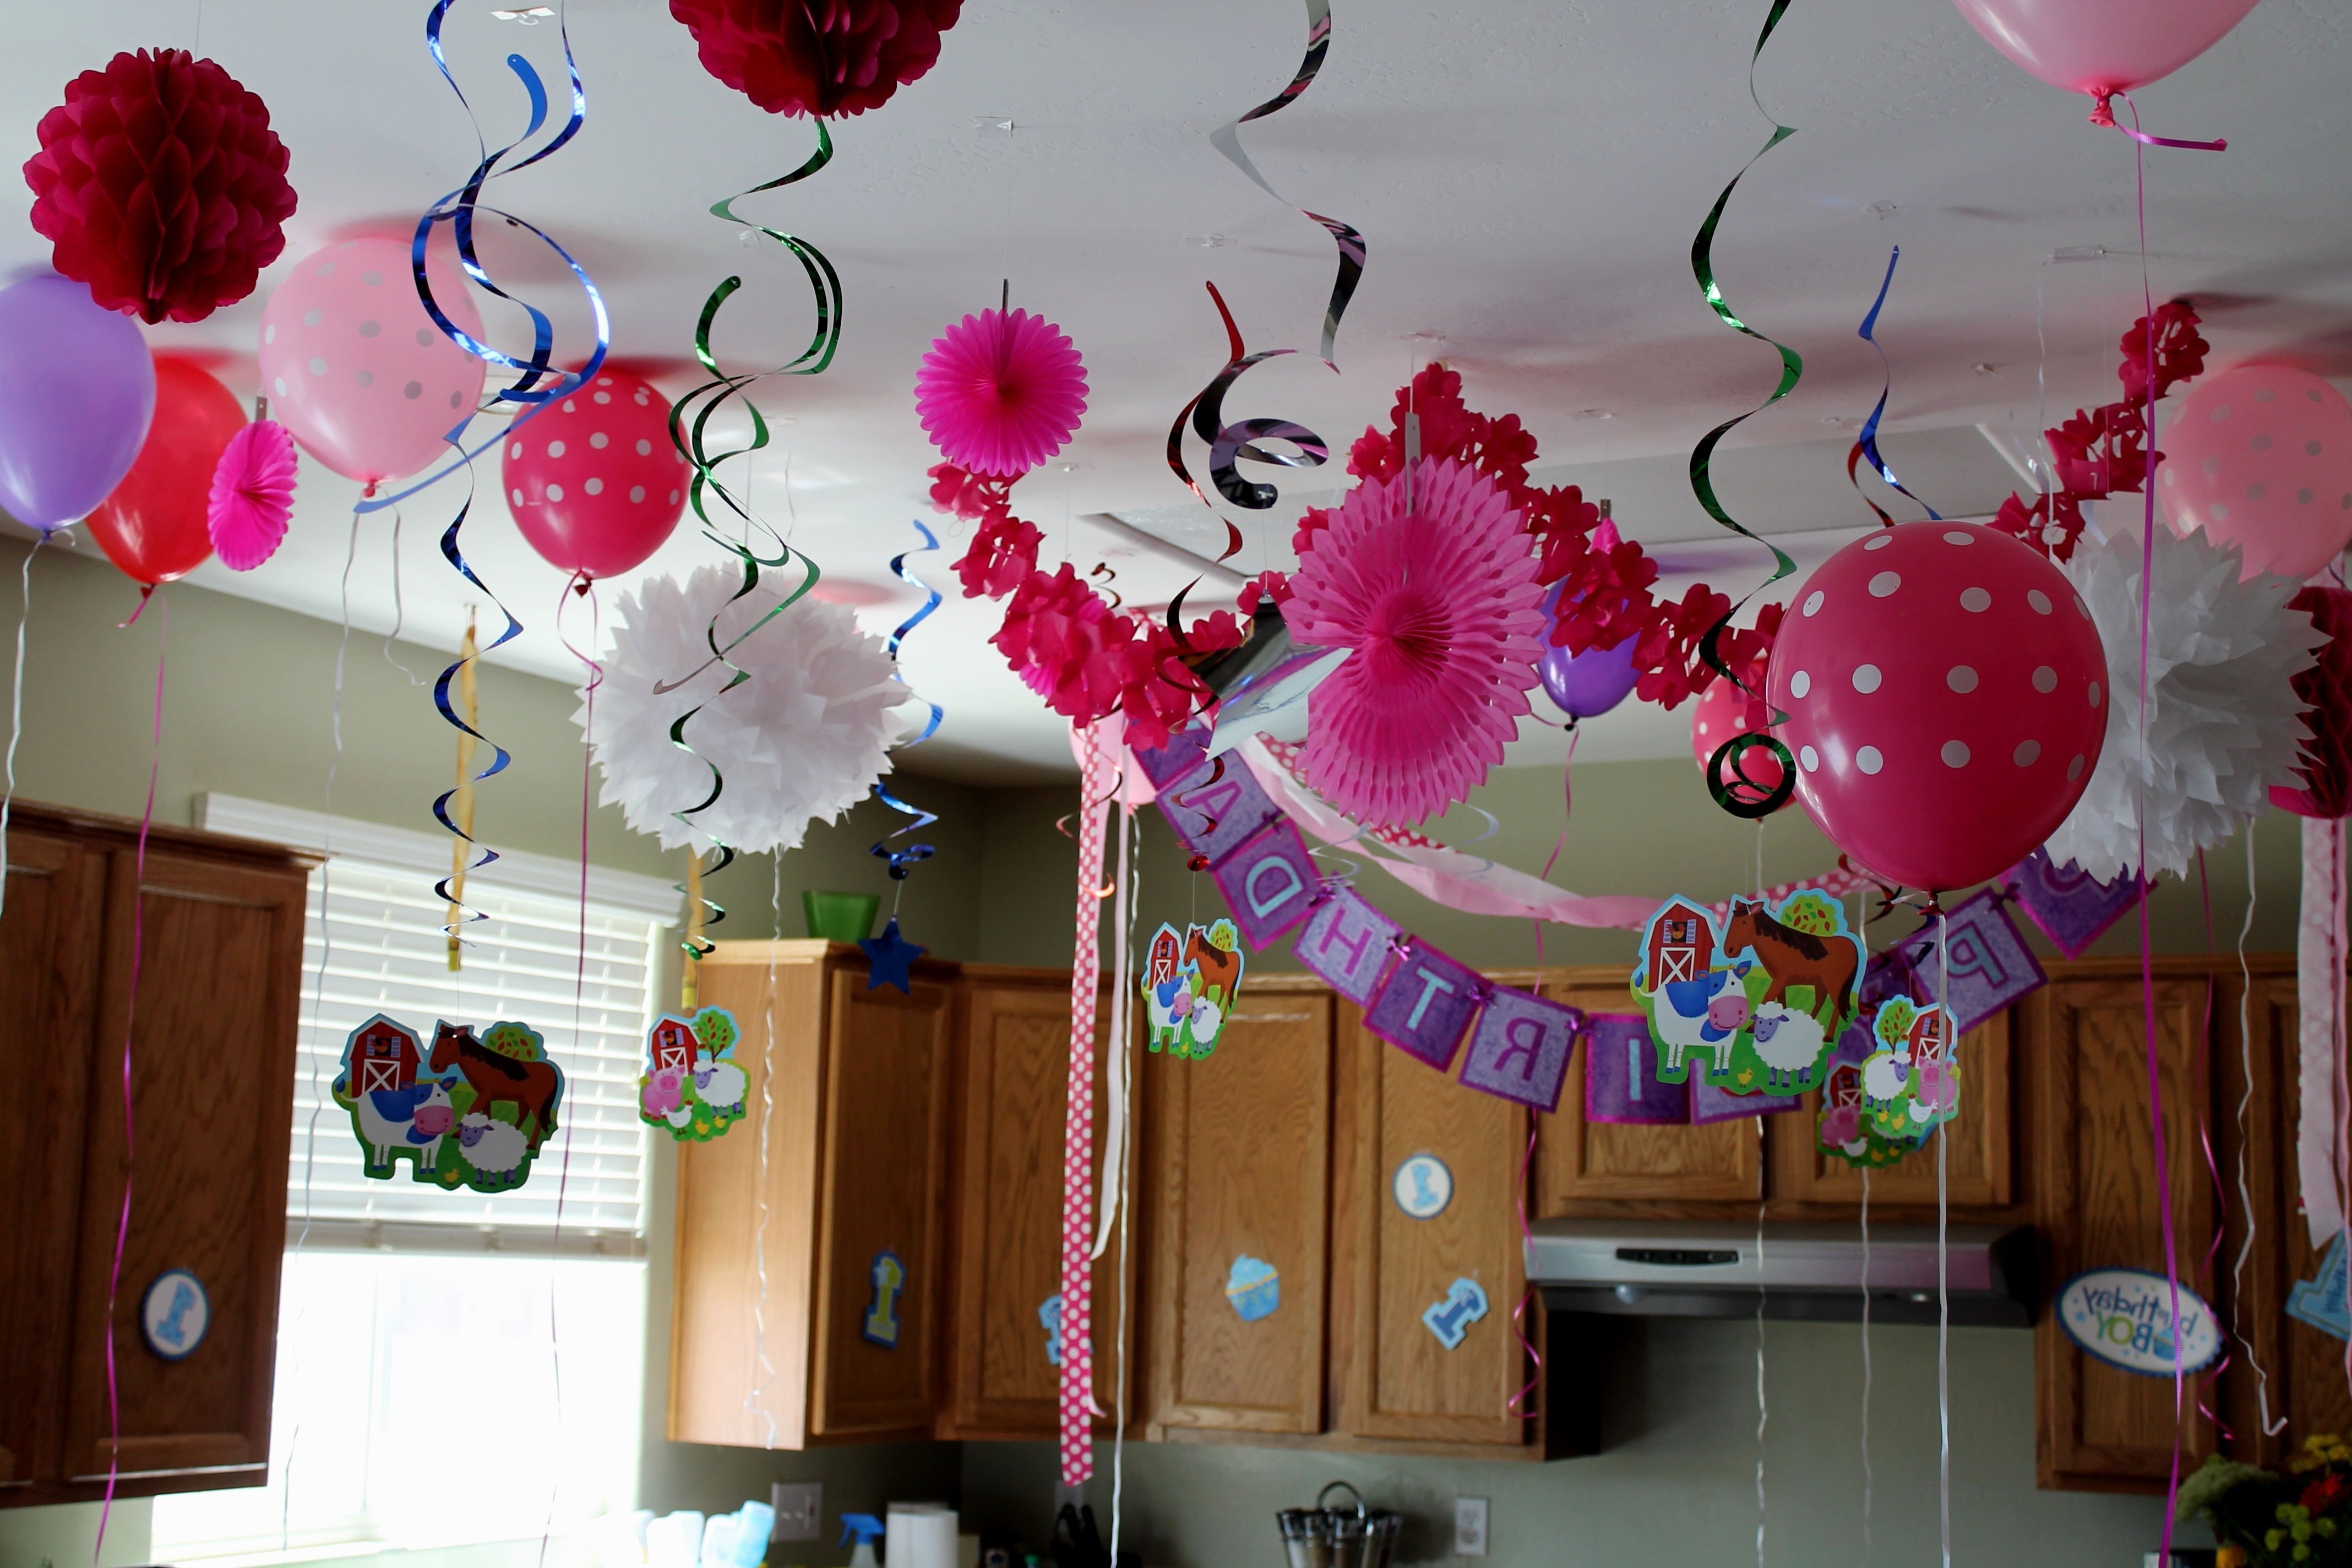 10 Cute Birthday Party Ideas At Home pictures of birthday party decorations nice home design top in 2022